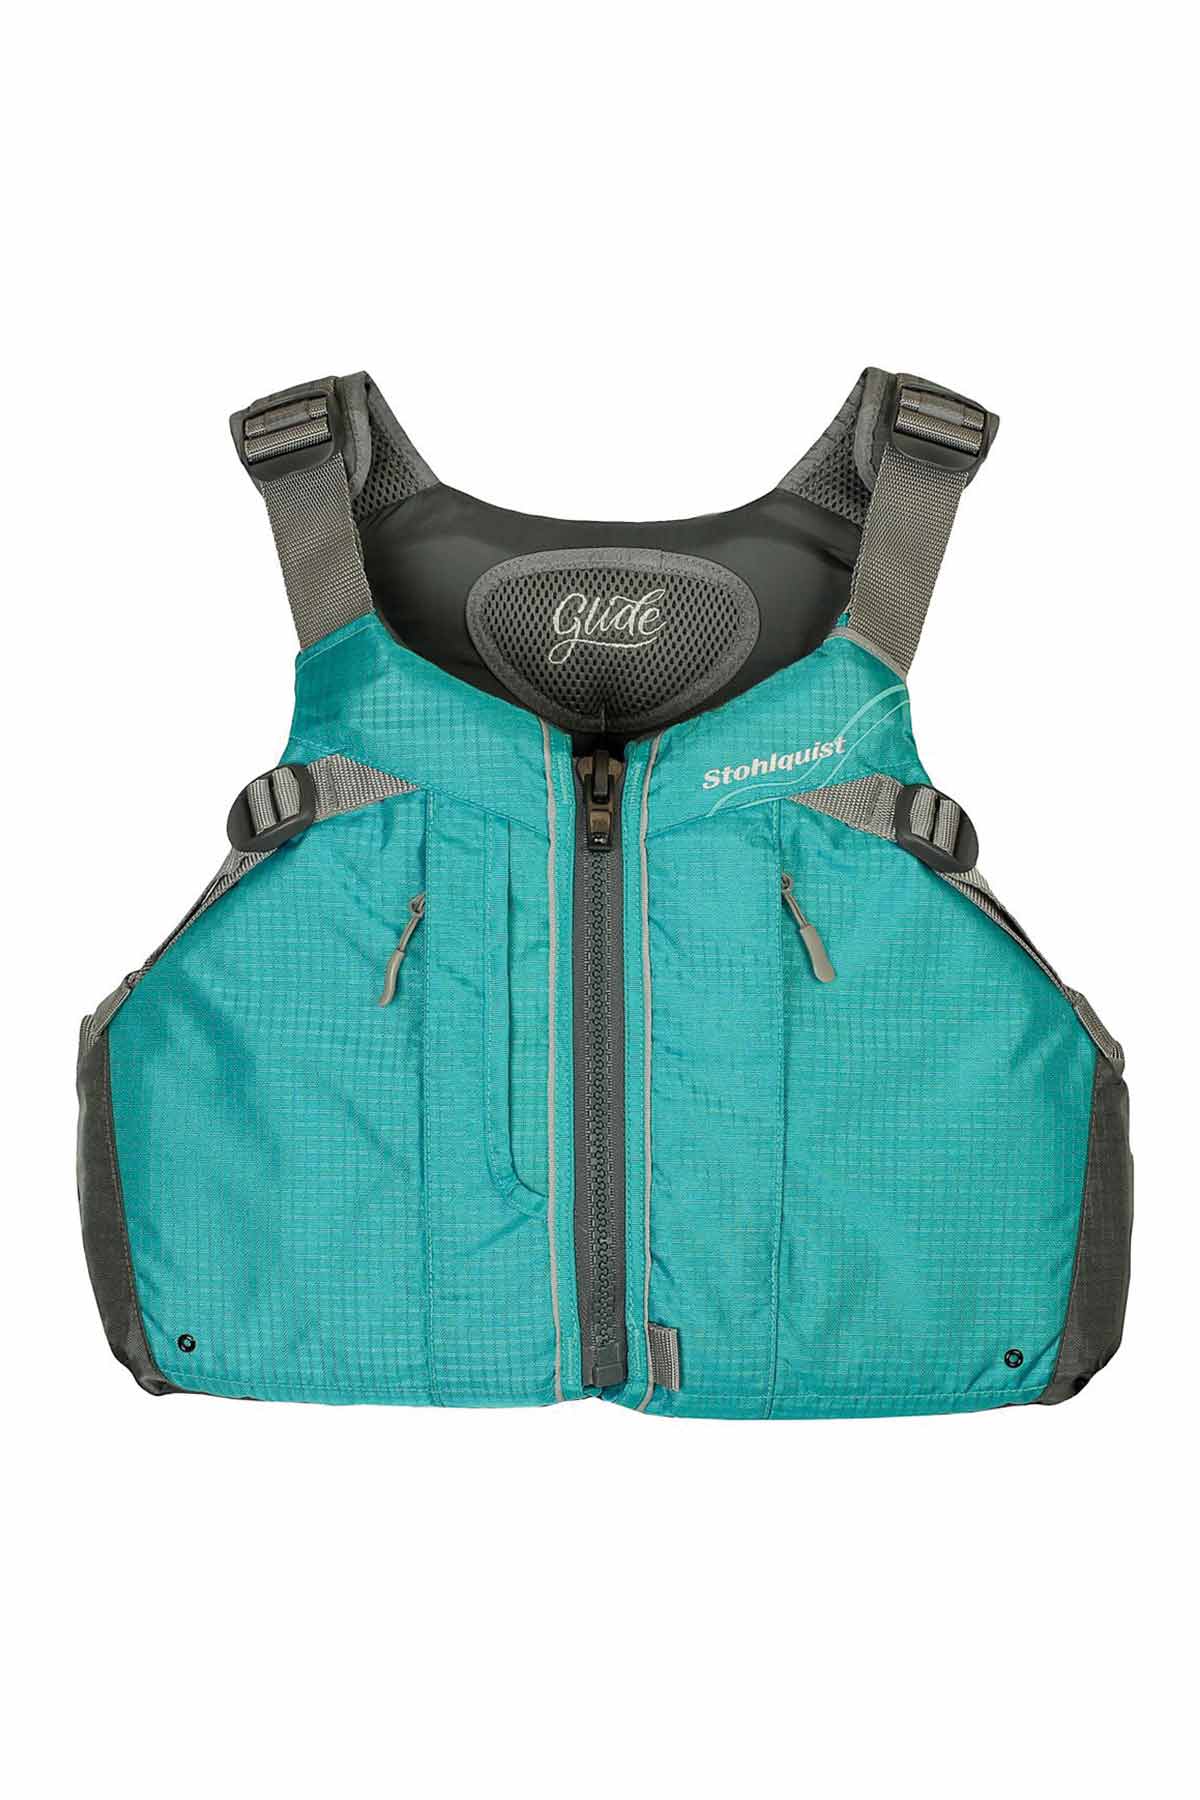 Stohlquist Women's Glide PFD Turquoise Front